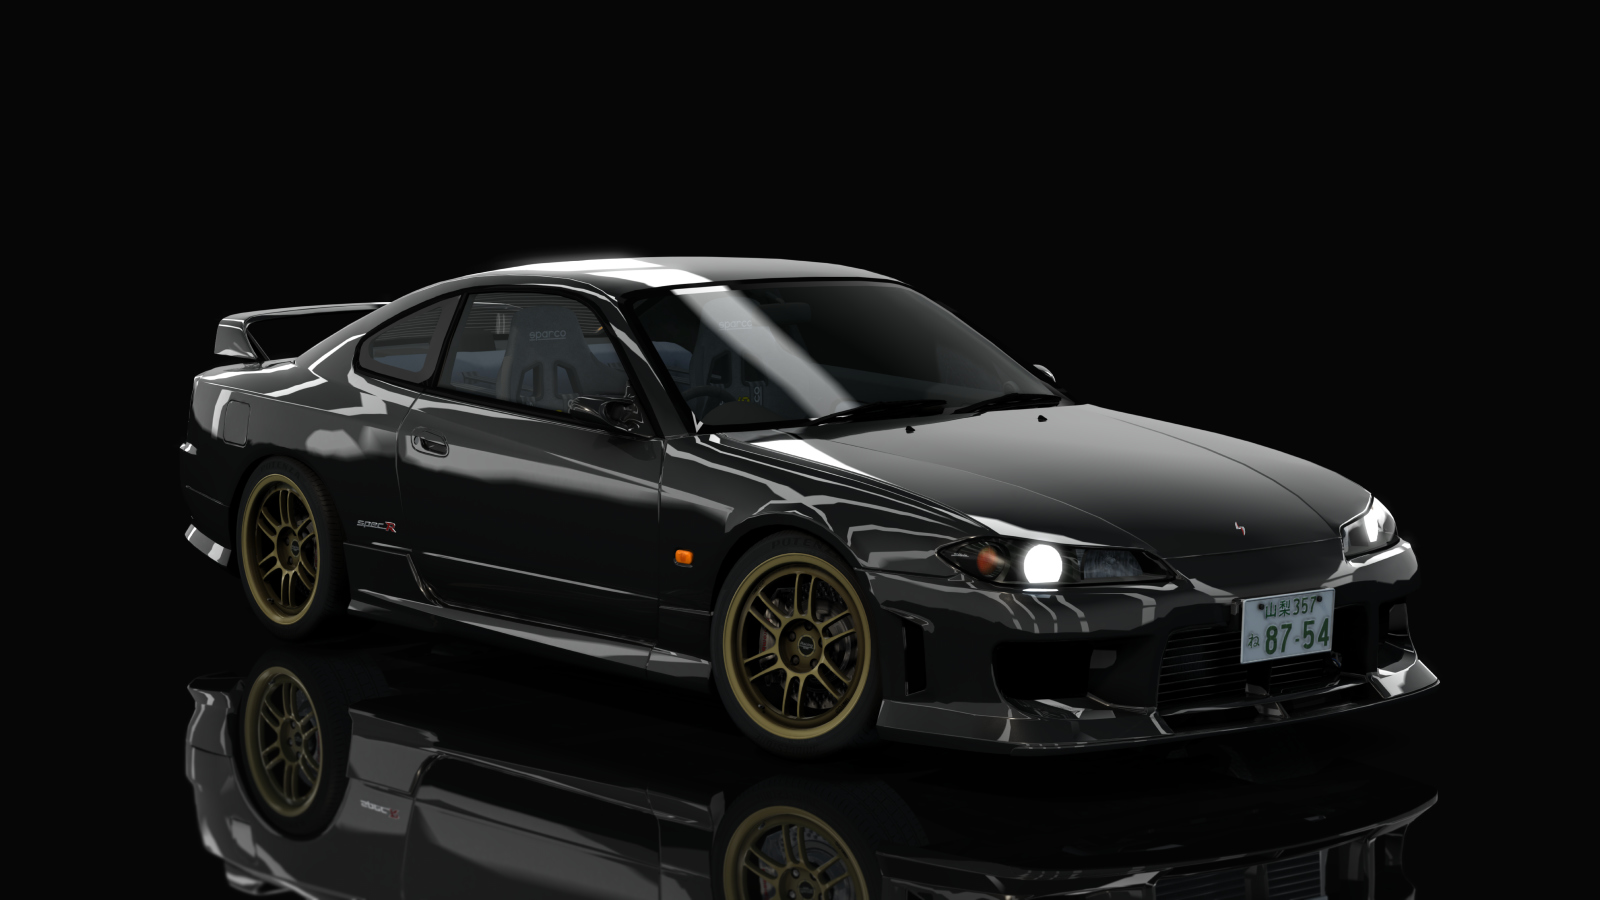 HOTHEAD21 Nissan Silvia S15 Preview Image